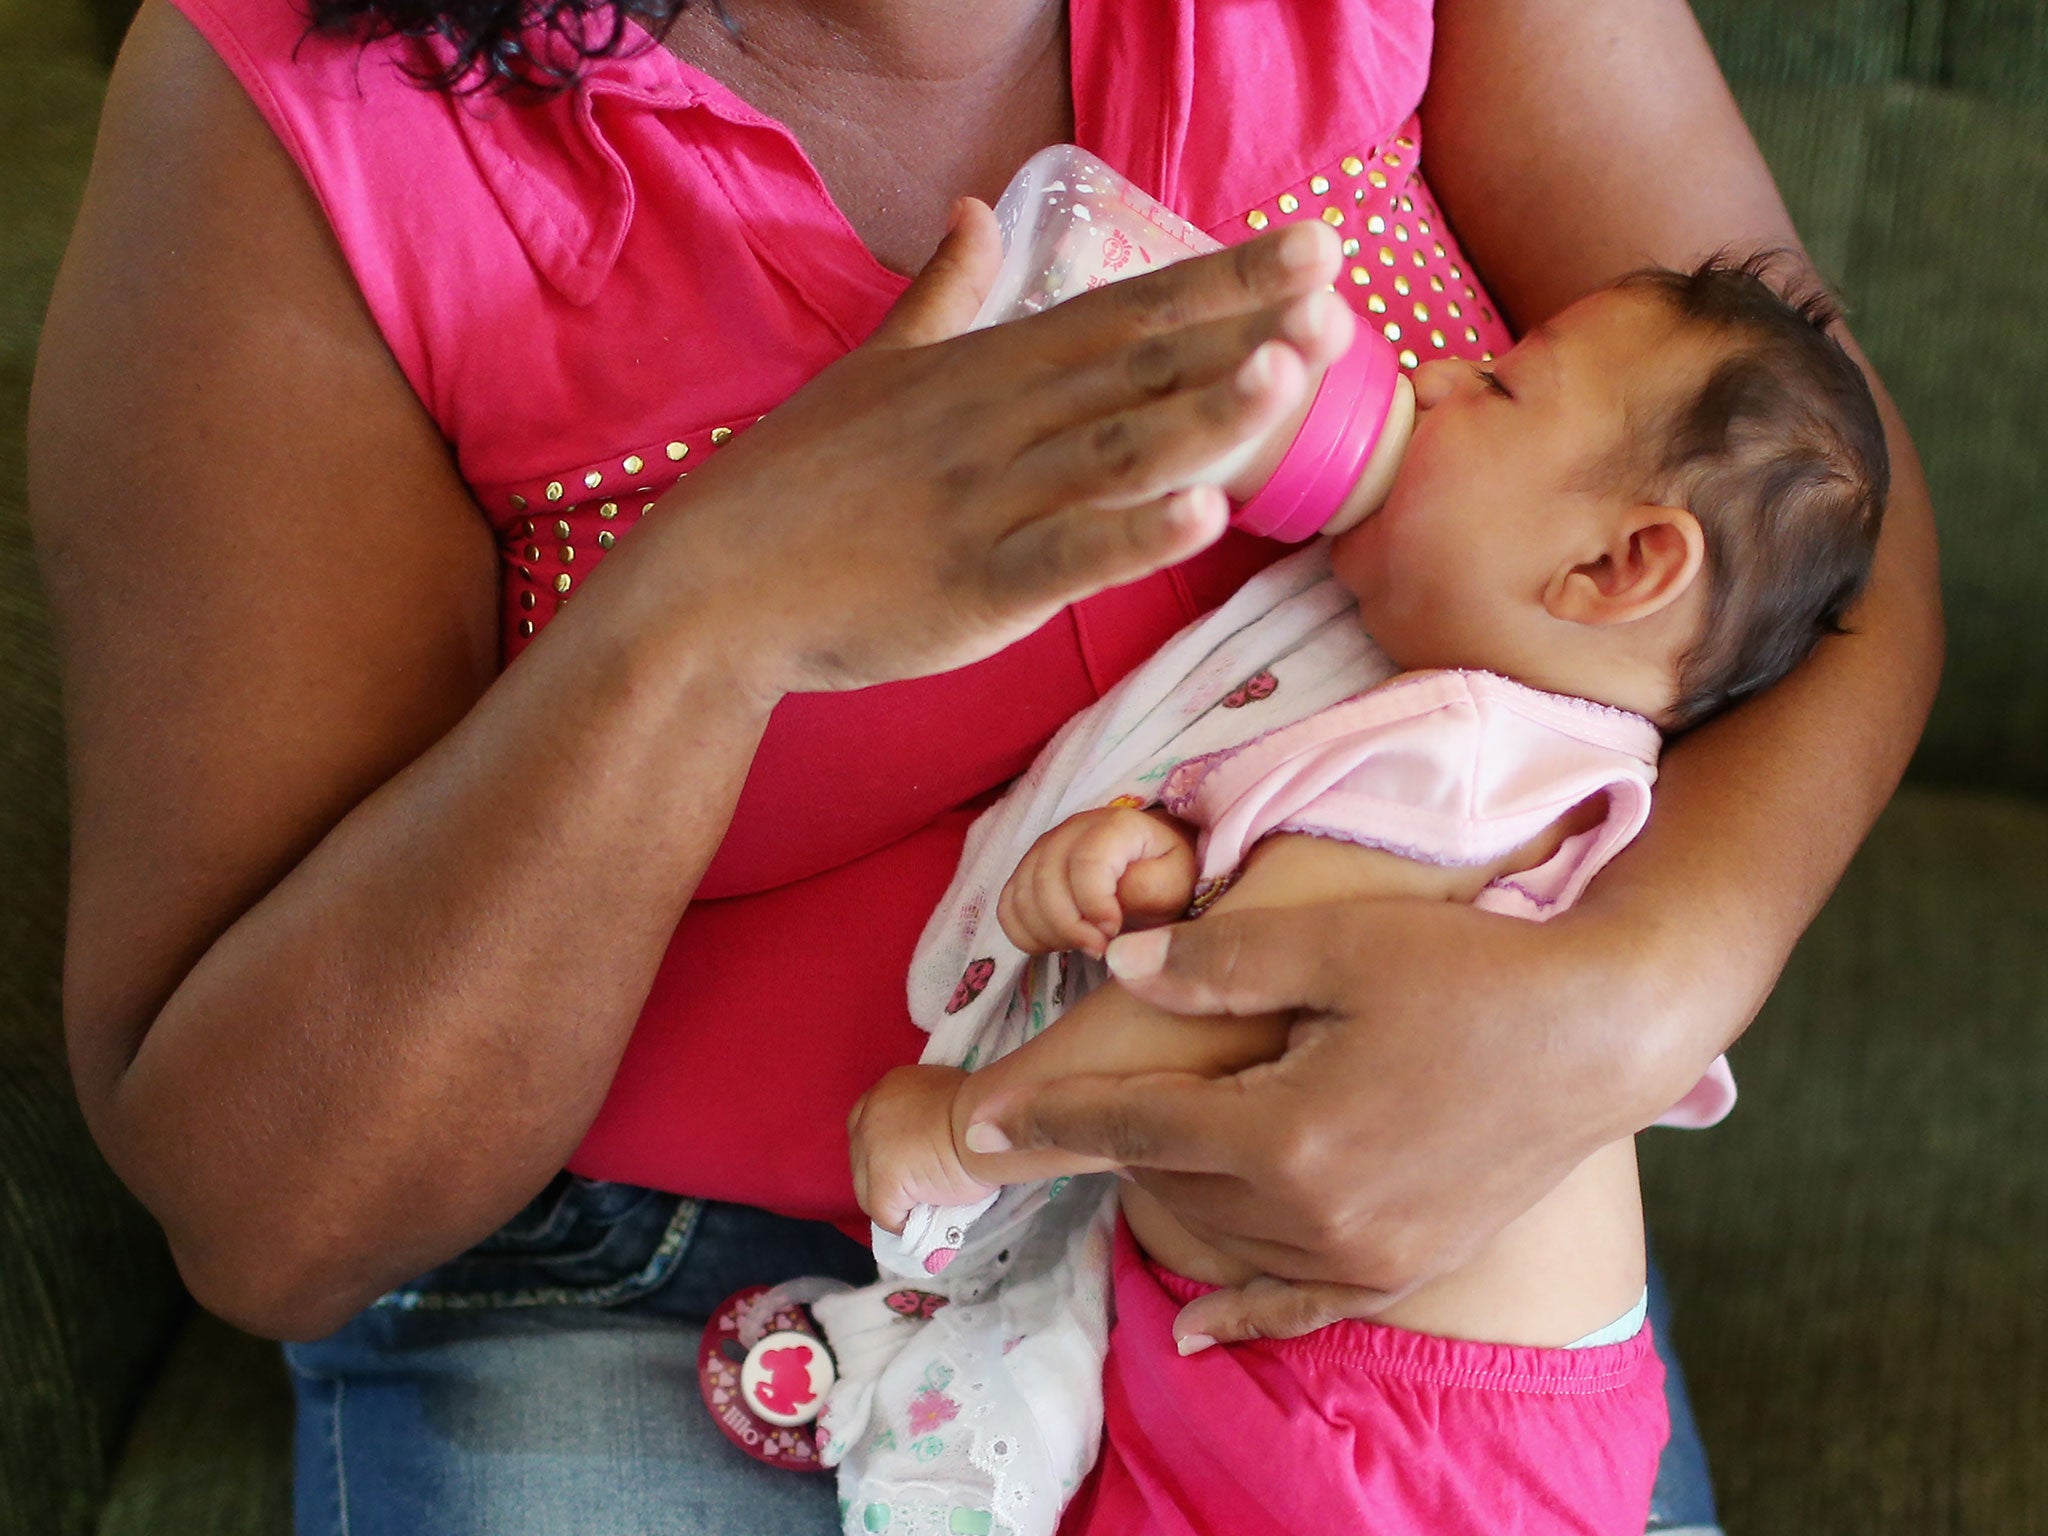 A three-month-old with microcephaly in Recife, Brazil. (Getty)